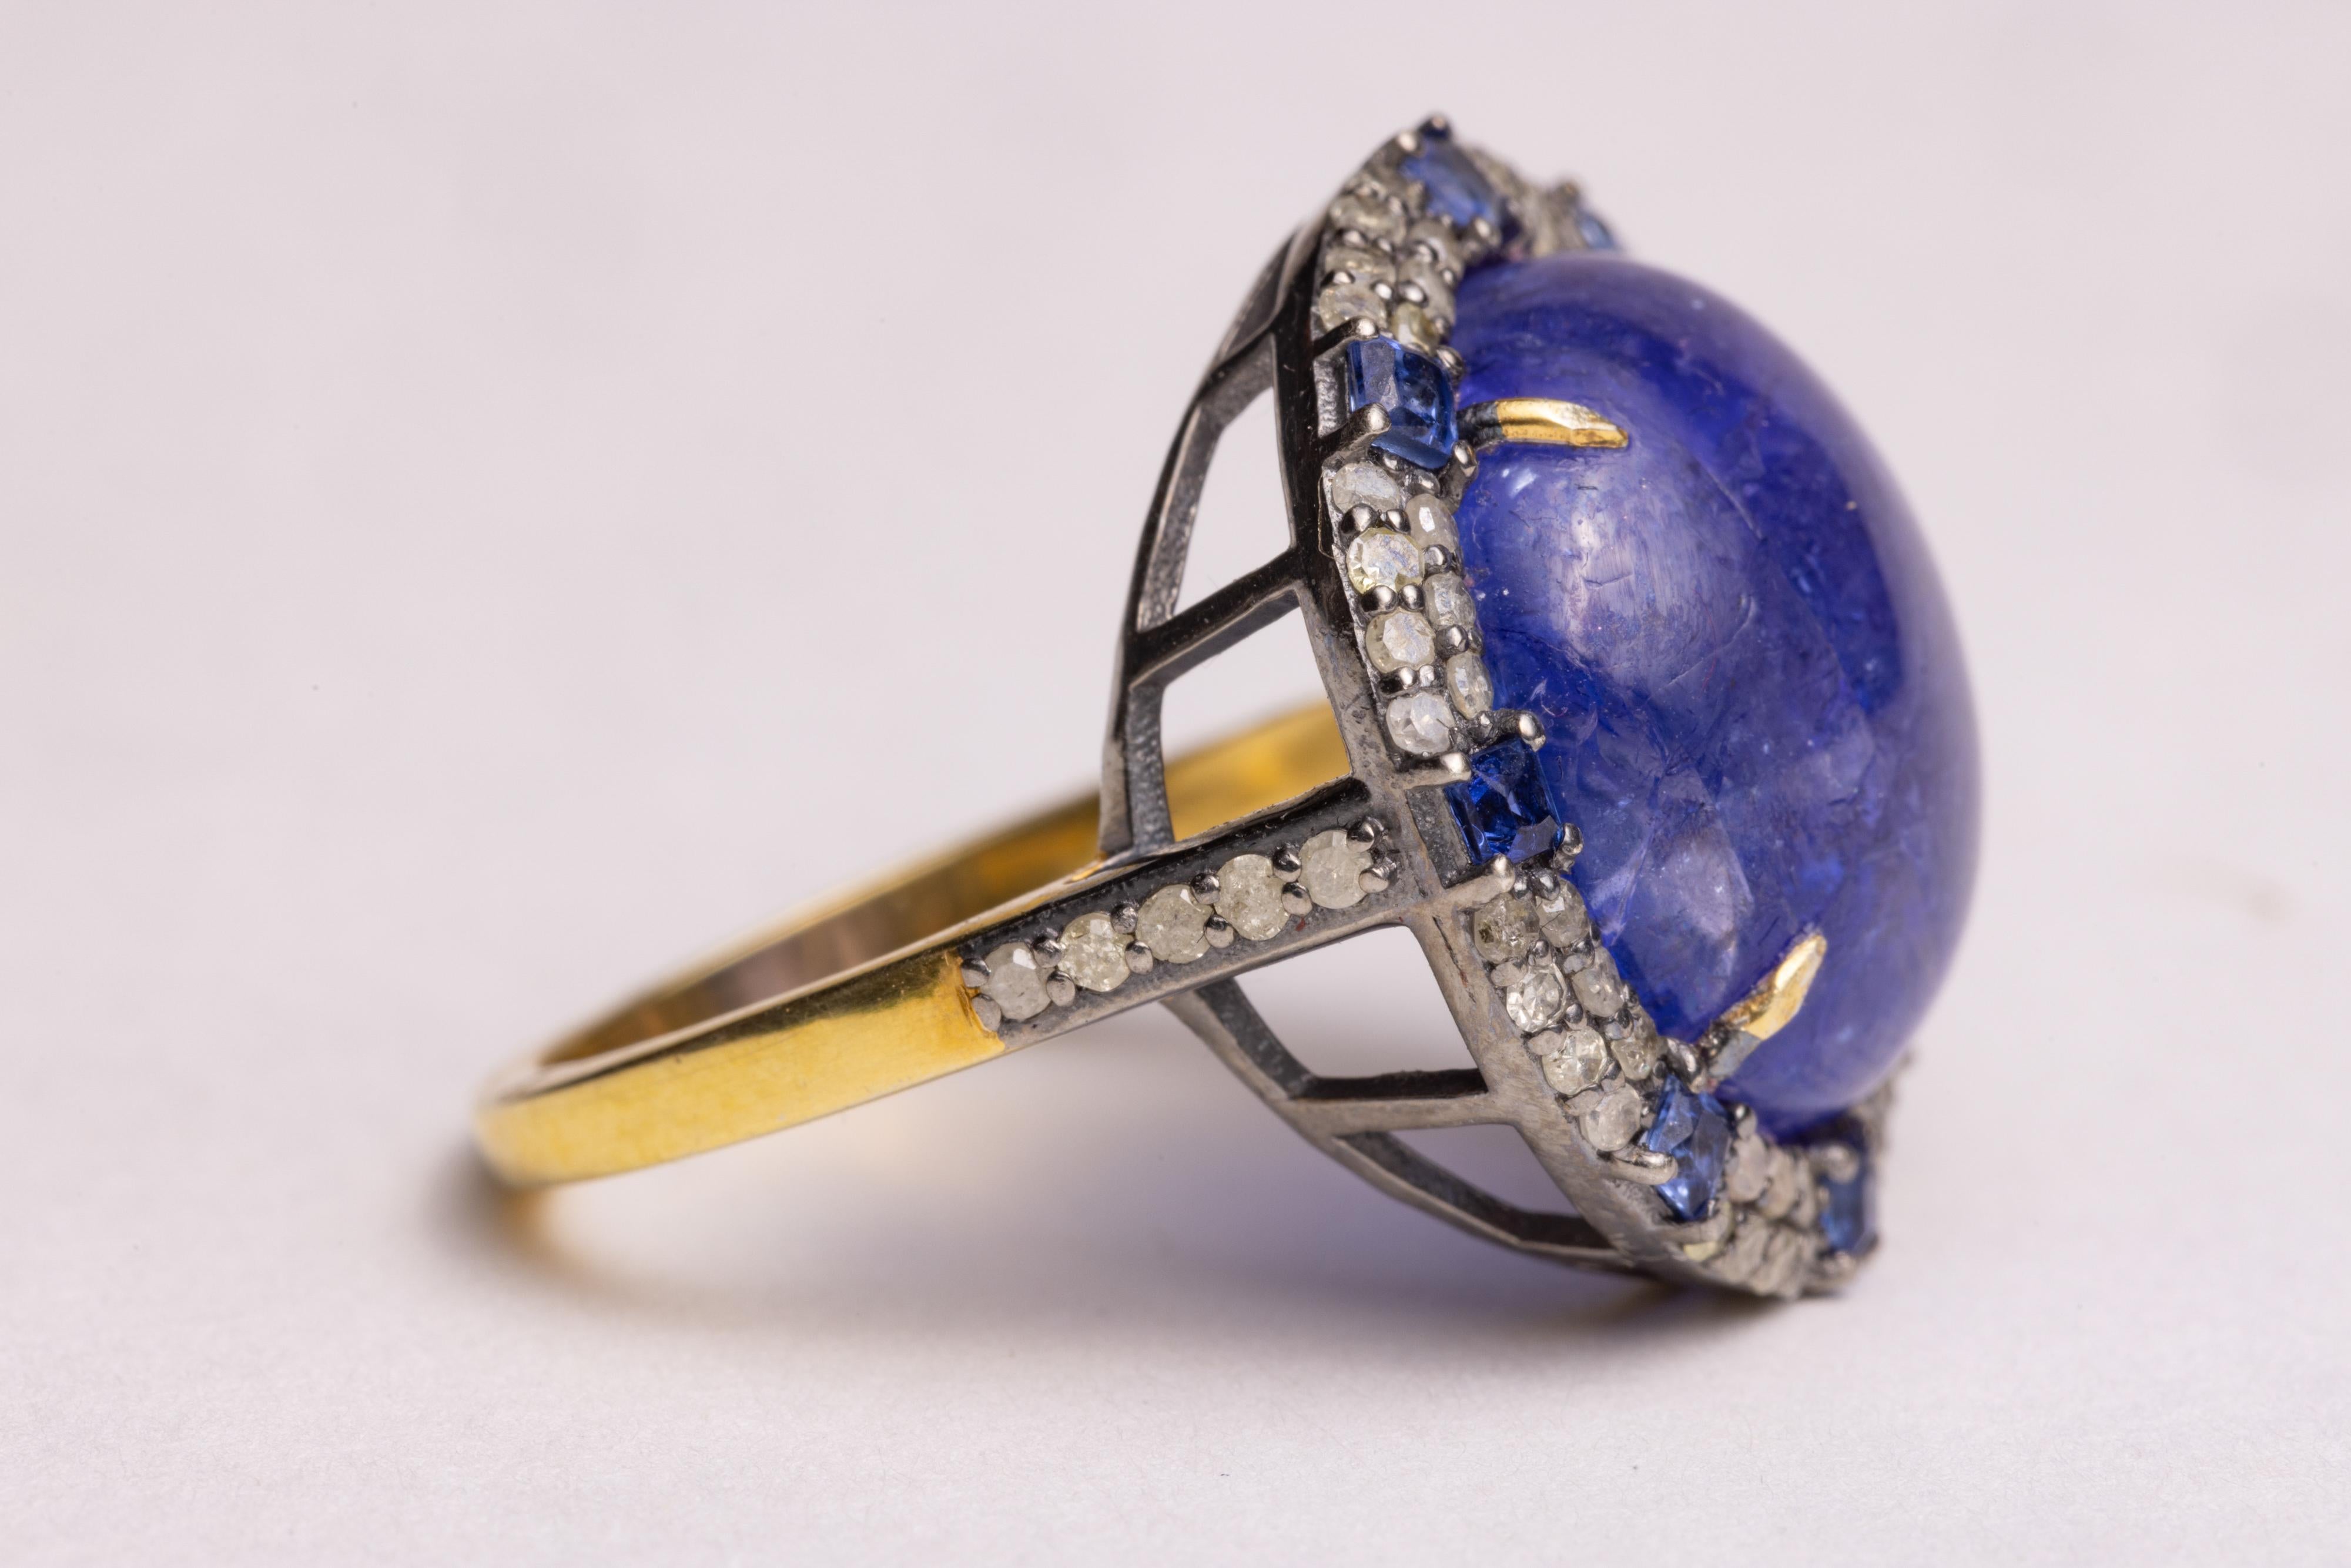 A large, stunning round cabochon Tanzanite dome cocktail ring.  Surrounded by two rows of round, brilliant cut diamonds with 8 faceted, square-cut sapphires in between.  Set in sterling silver and 18K gold vermeil.  ring size is 7.25.  Carat weight